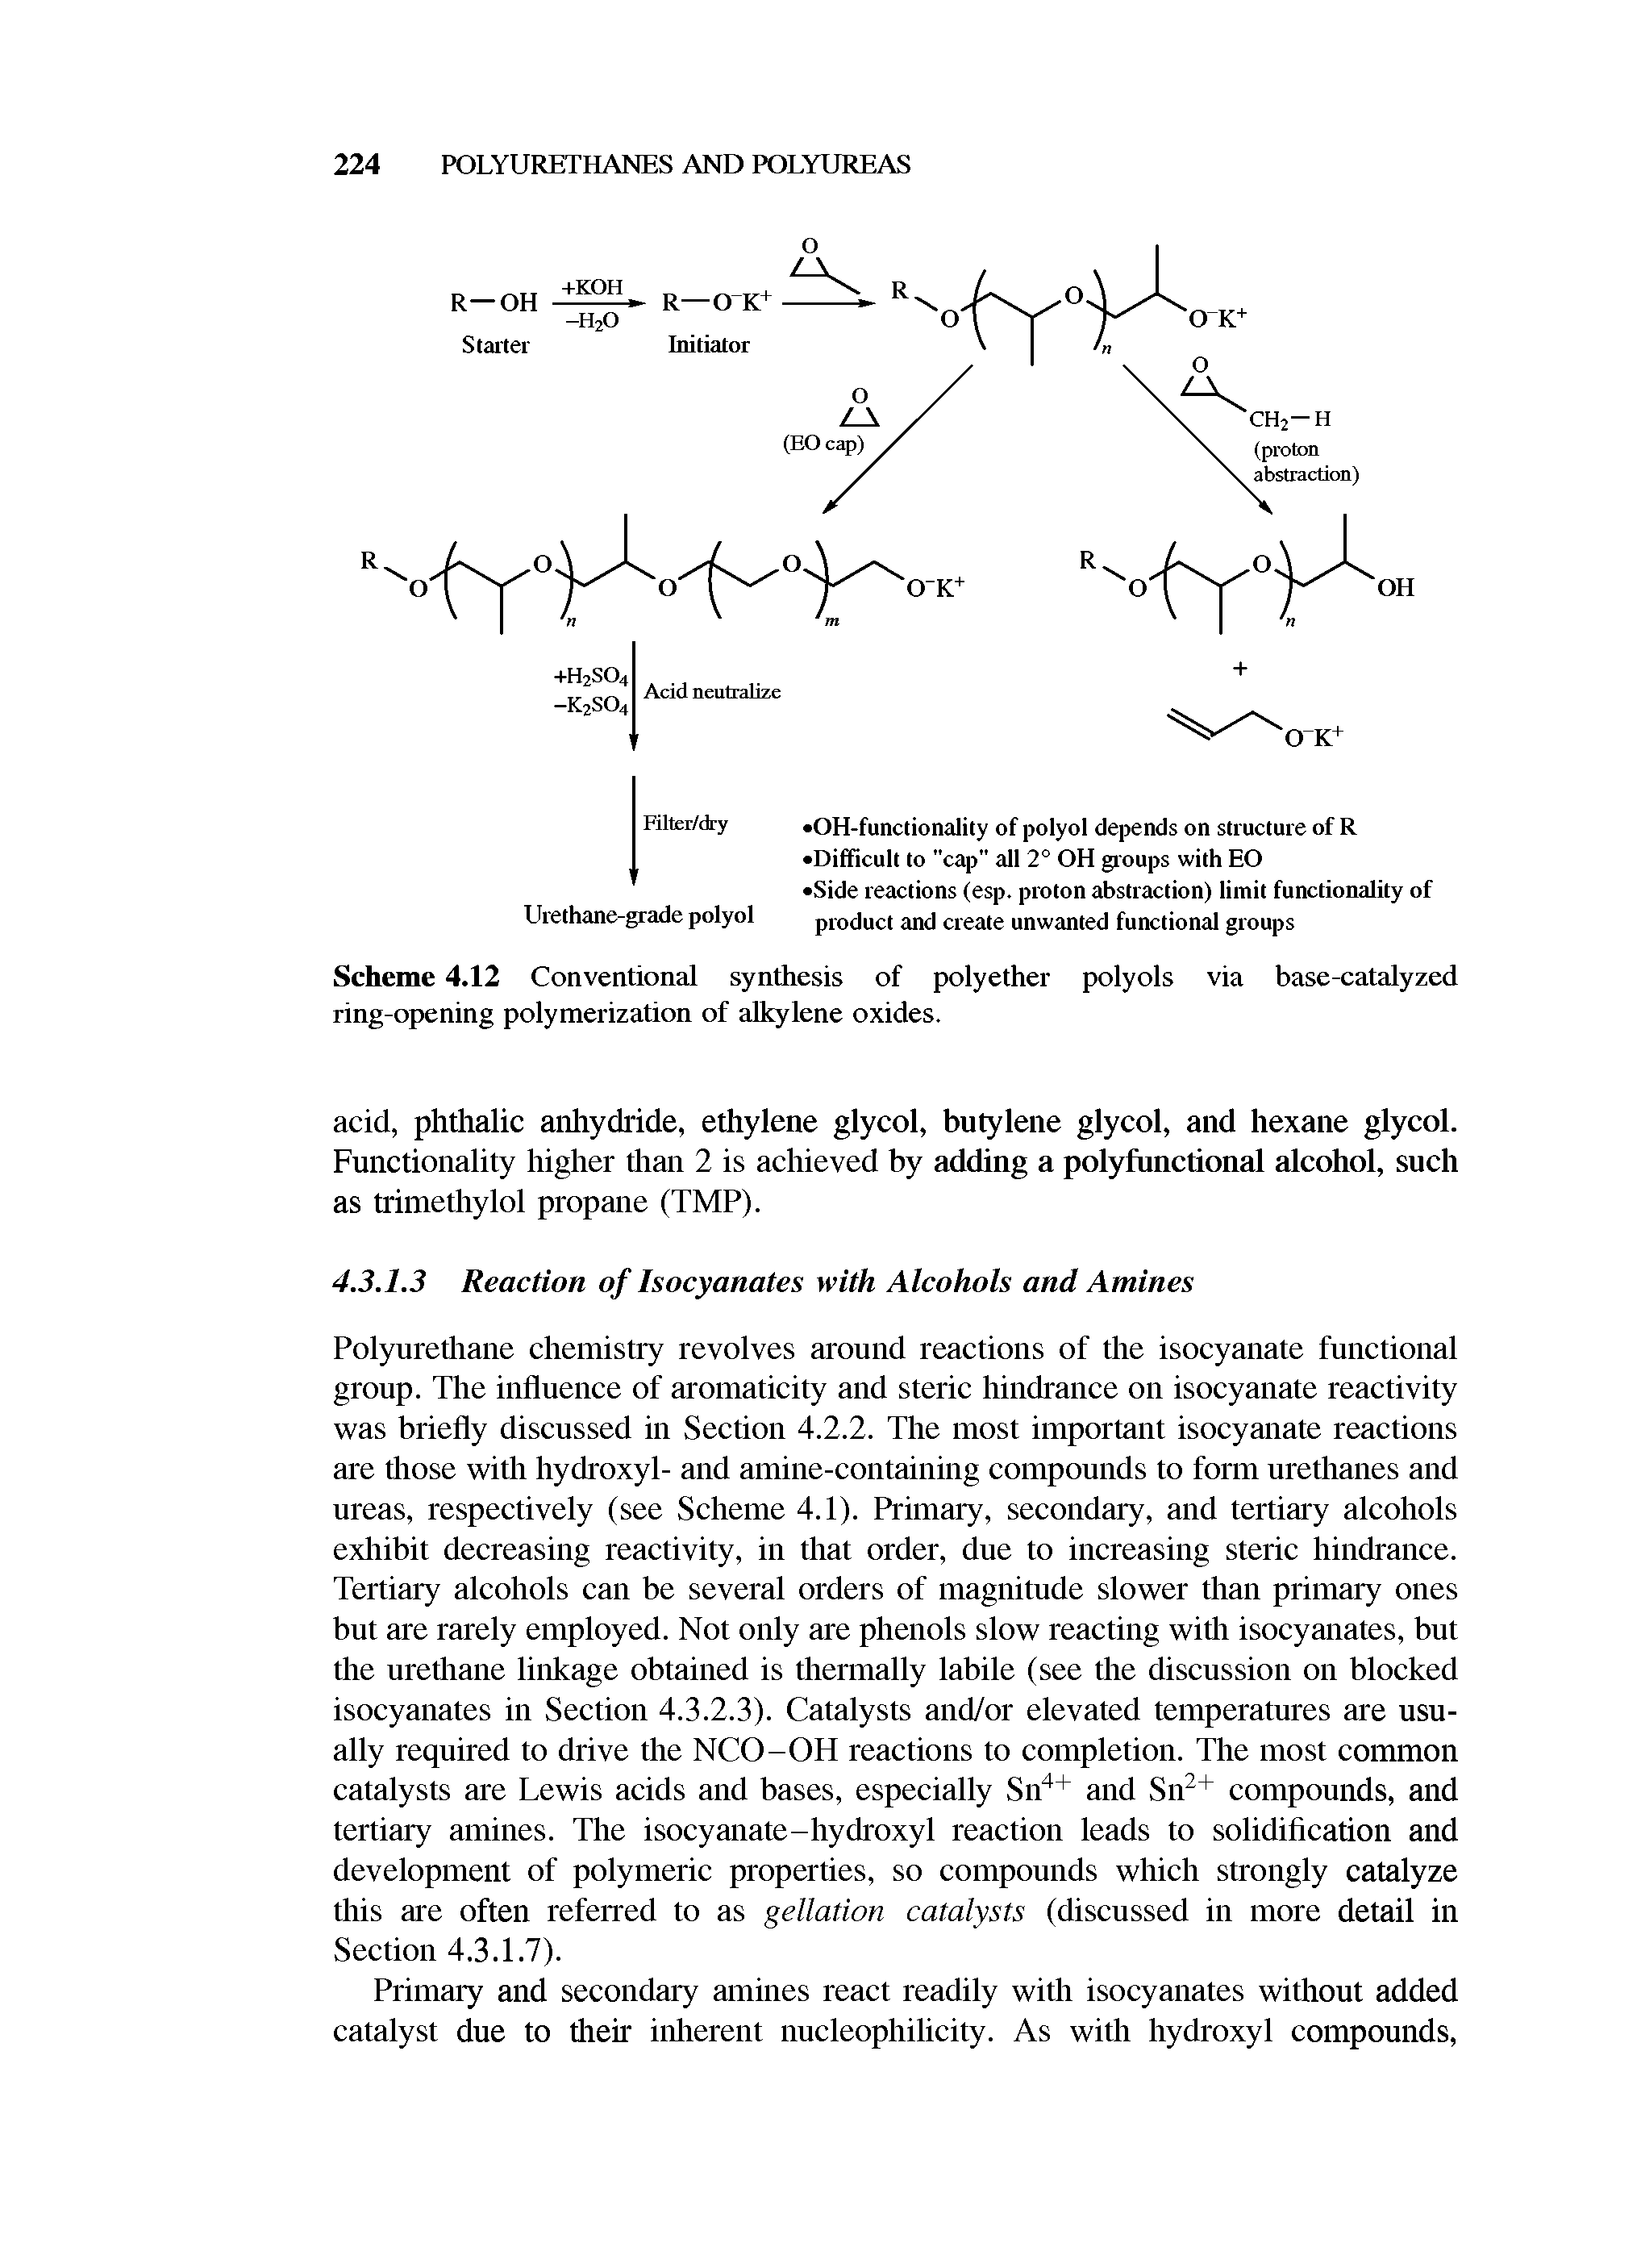 Scheme 4.12 Conventional synthesis of polyether polyols via base-catalyzed ring-opening polymerization of alkylene oxides.